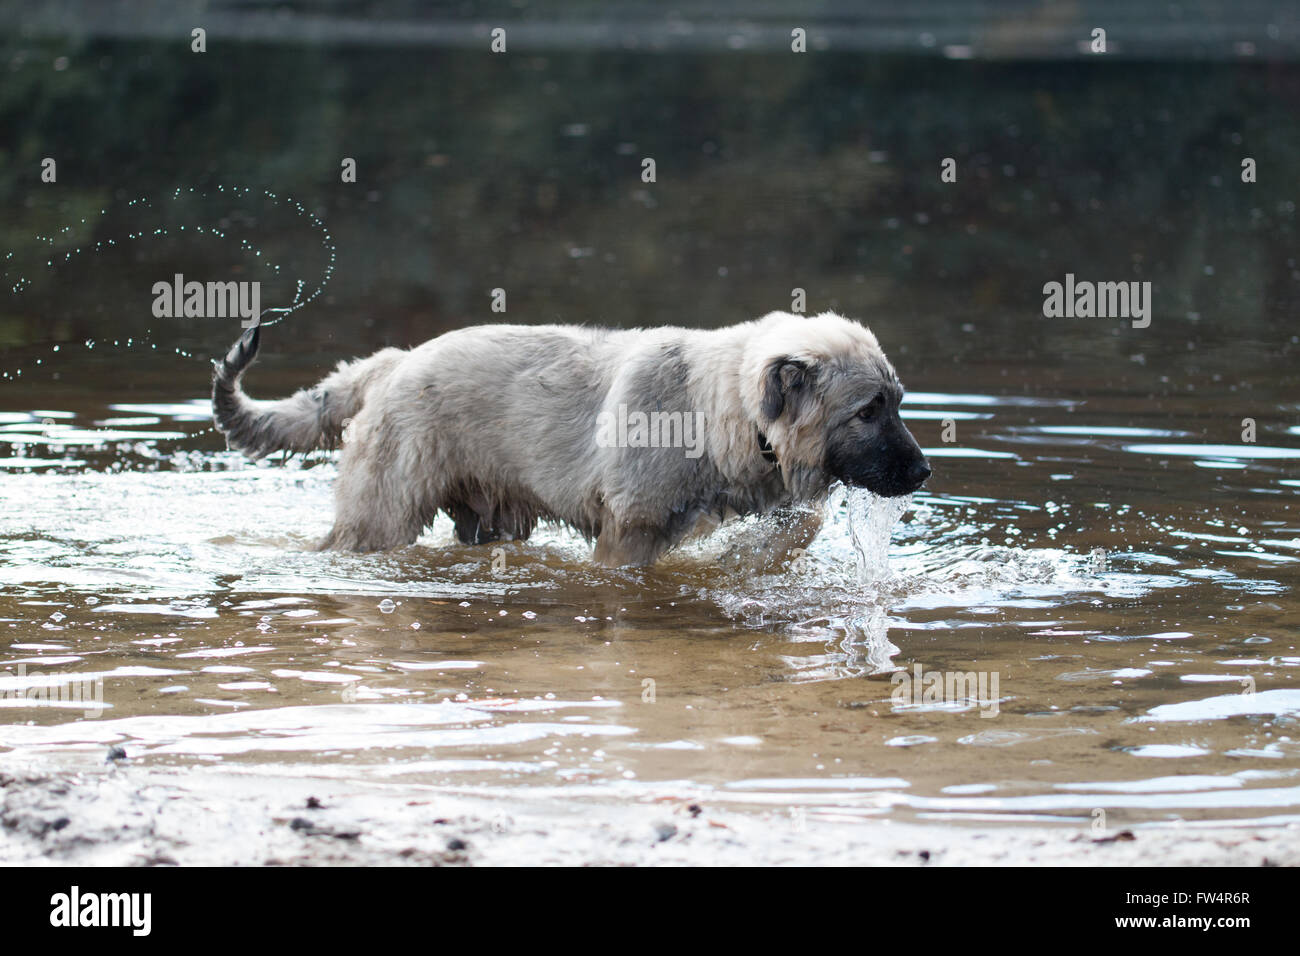 Young Turkish sheepdog playing in water Stock Photo